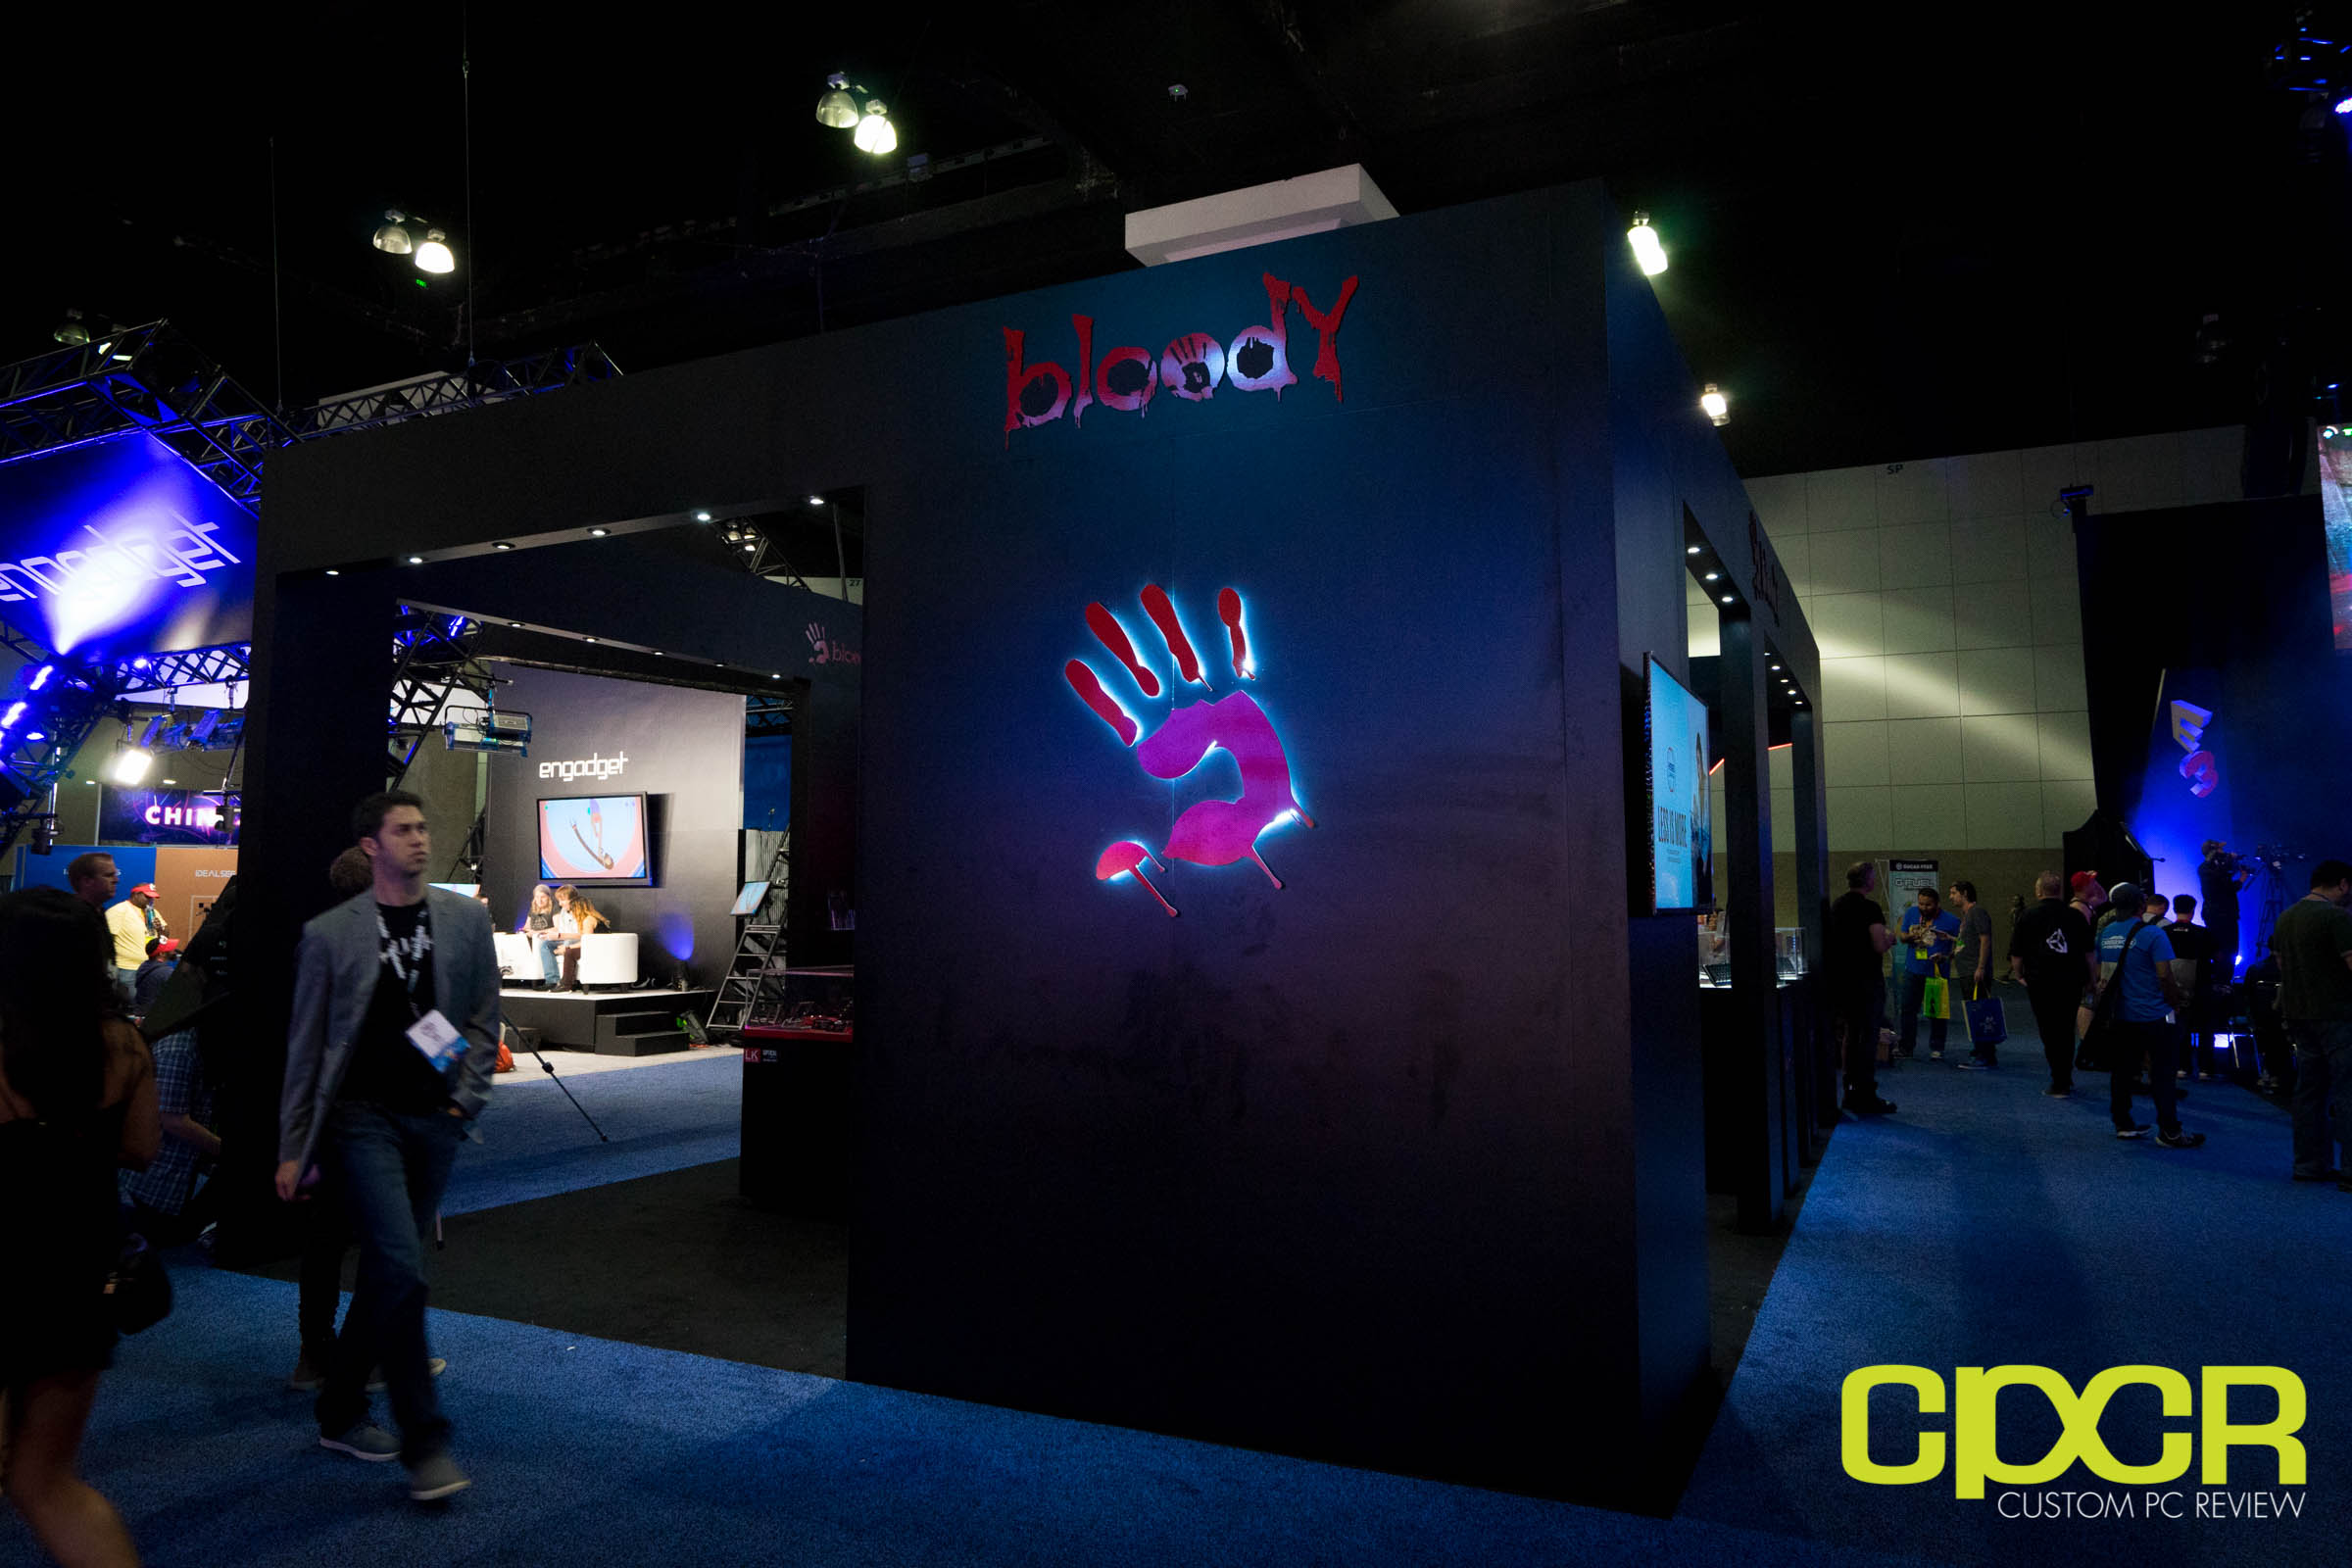 Bloody Unveils New Infrared Light Strike Switch Gaming Peripherals, Carbon Fiber Mycelium Headphones at E3 2017